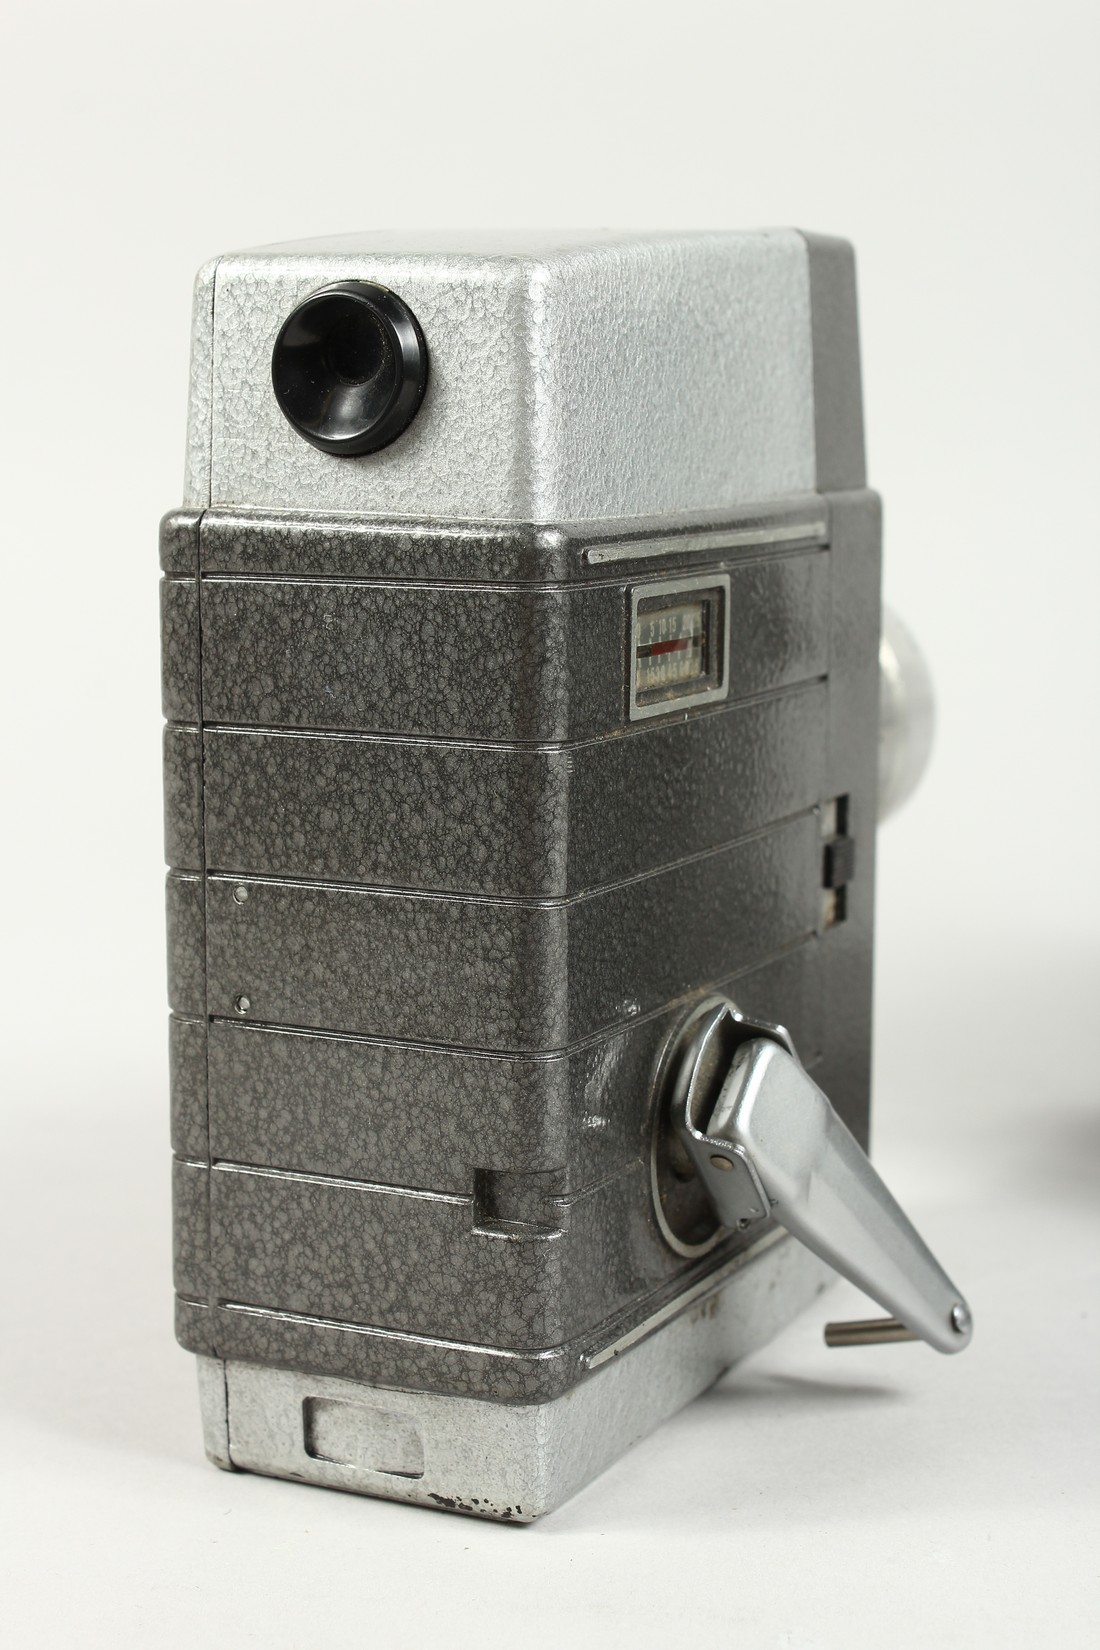 A BELL AND HOWELL LEATHER CASED MOVIE CAMERA - Image 7 of 14